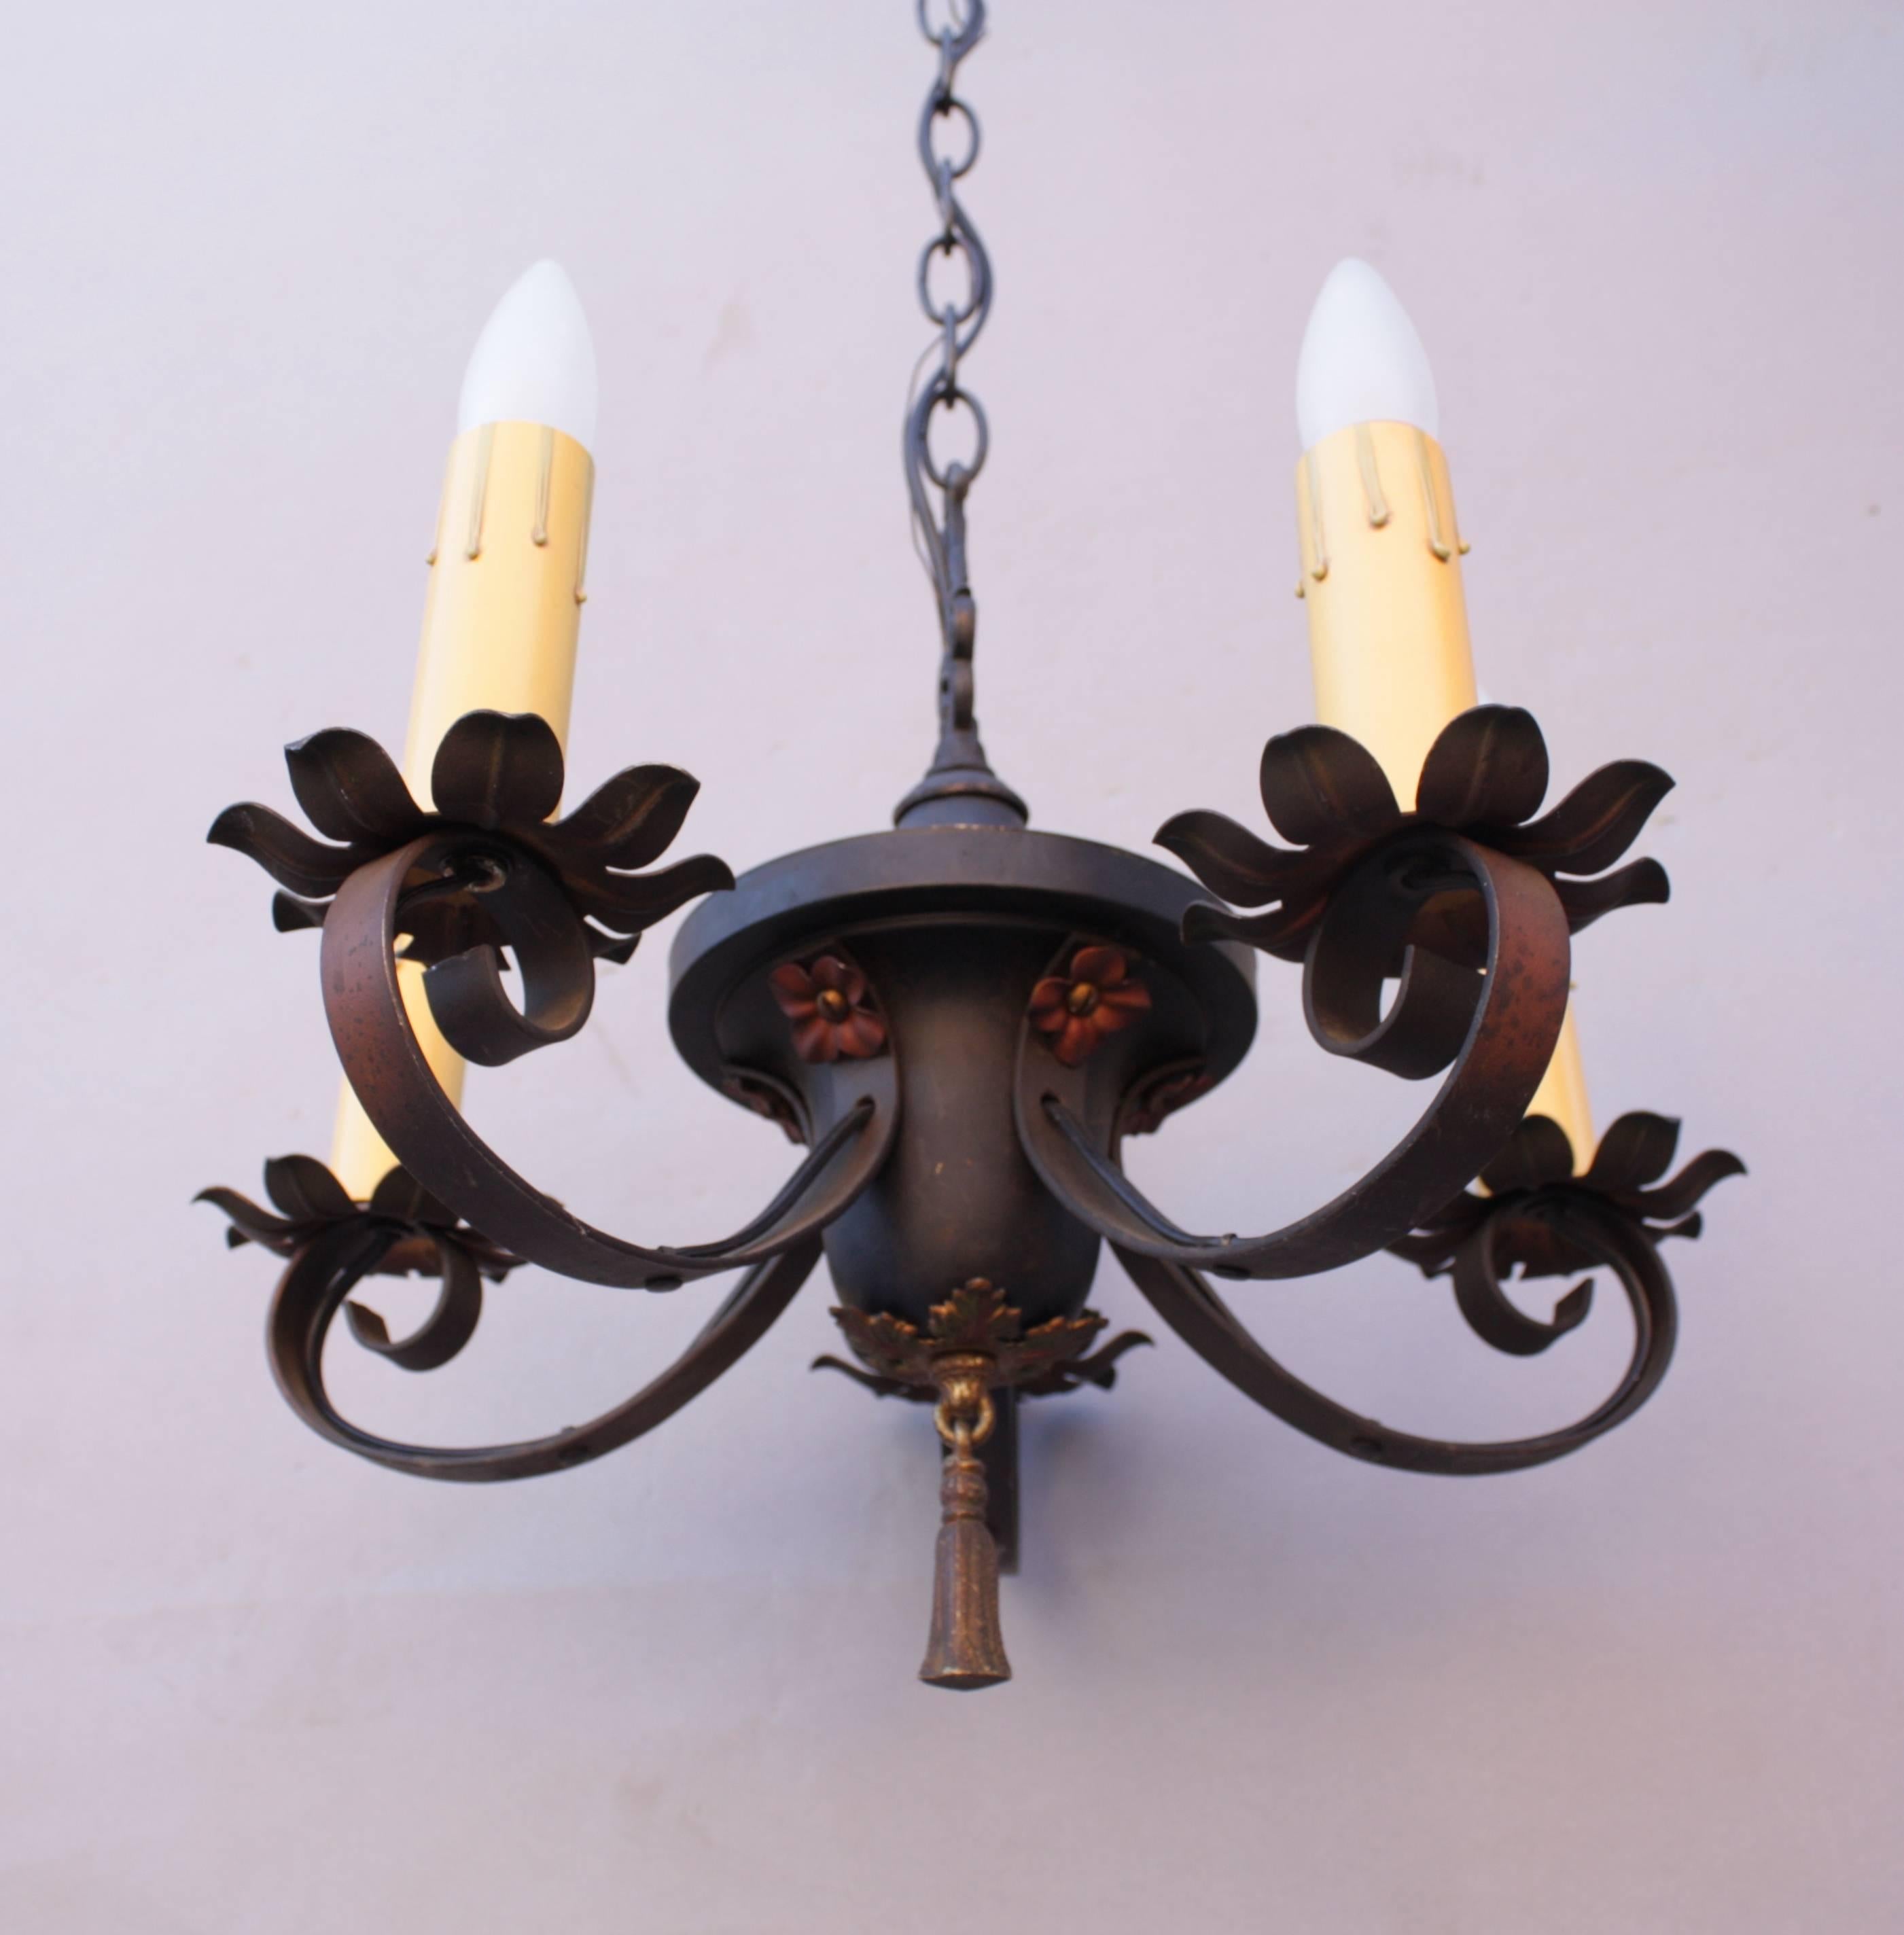 Spanish Colonial Small-Scale Spanish Revival Chandelier, 1920s